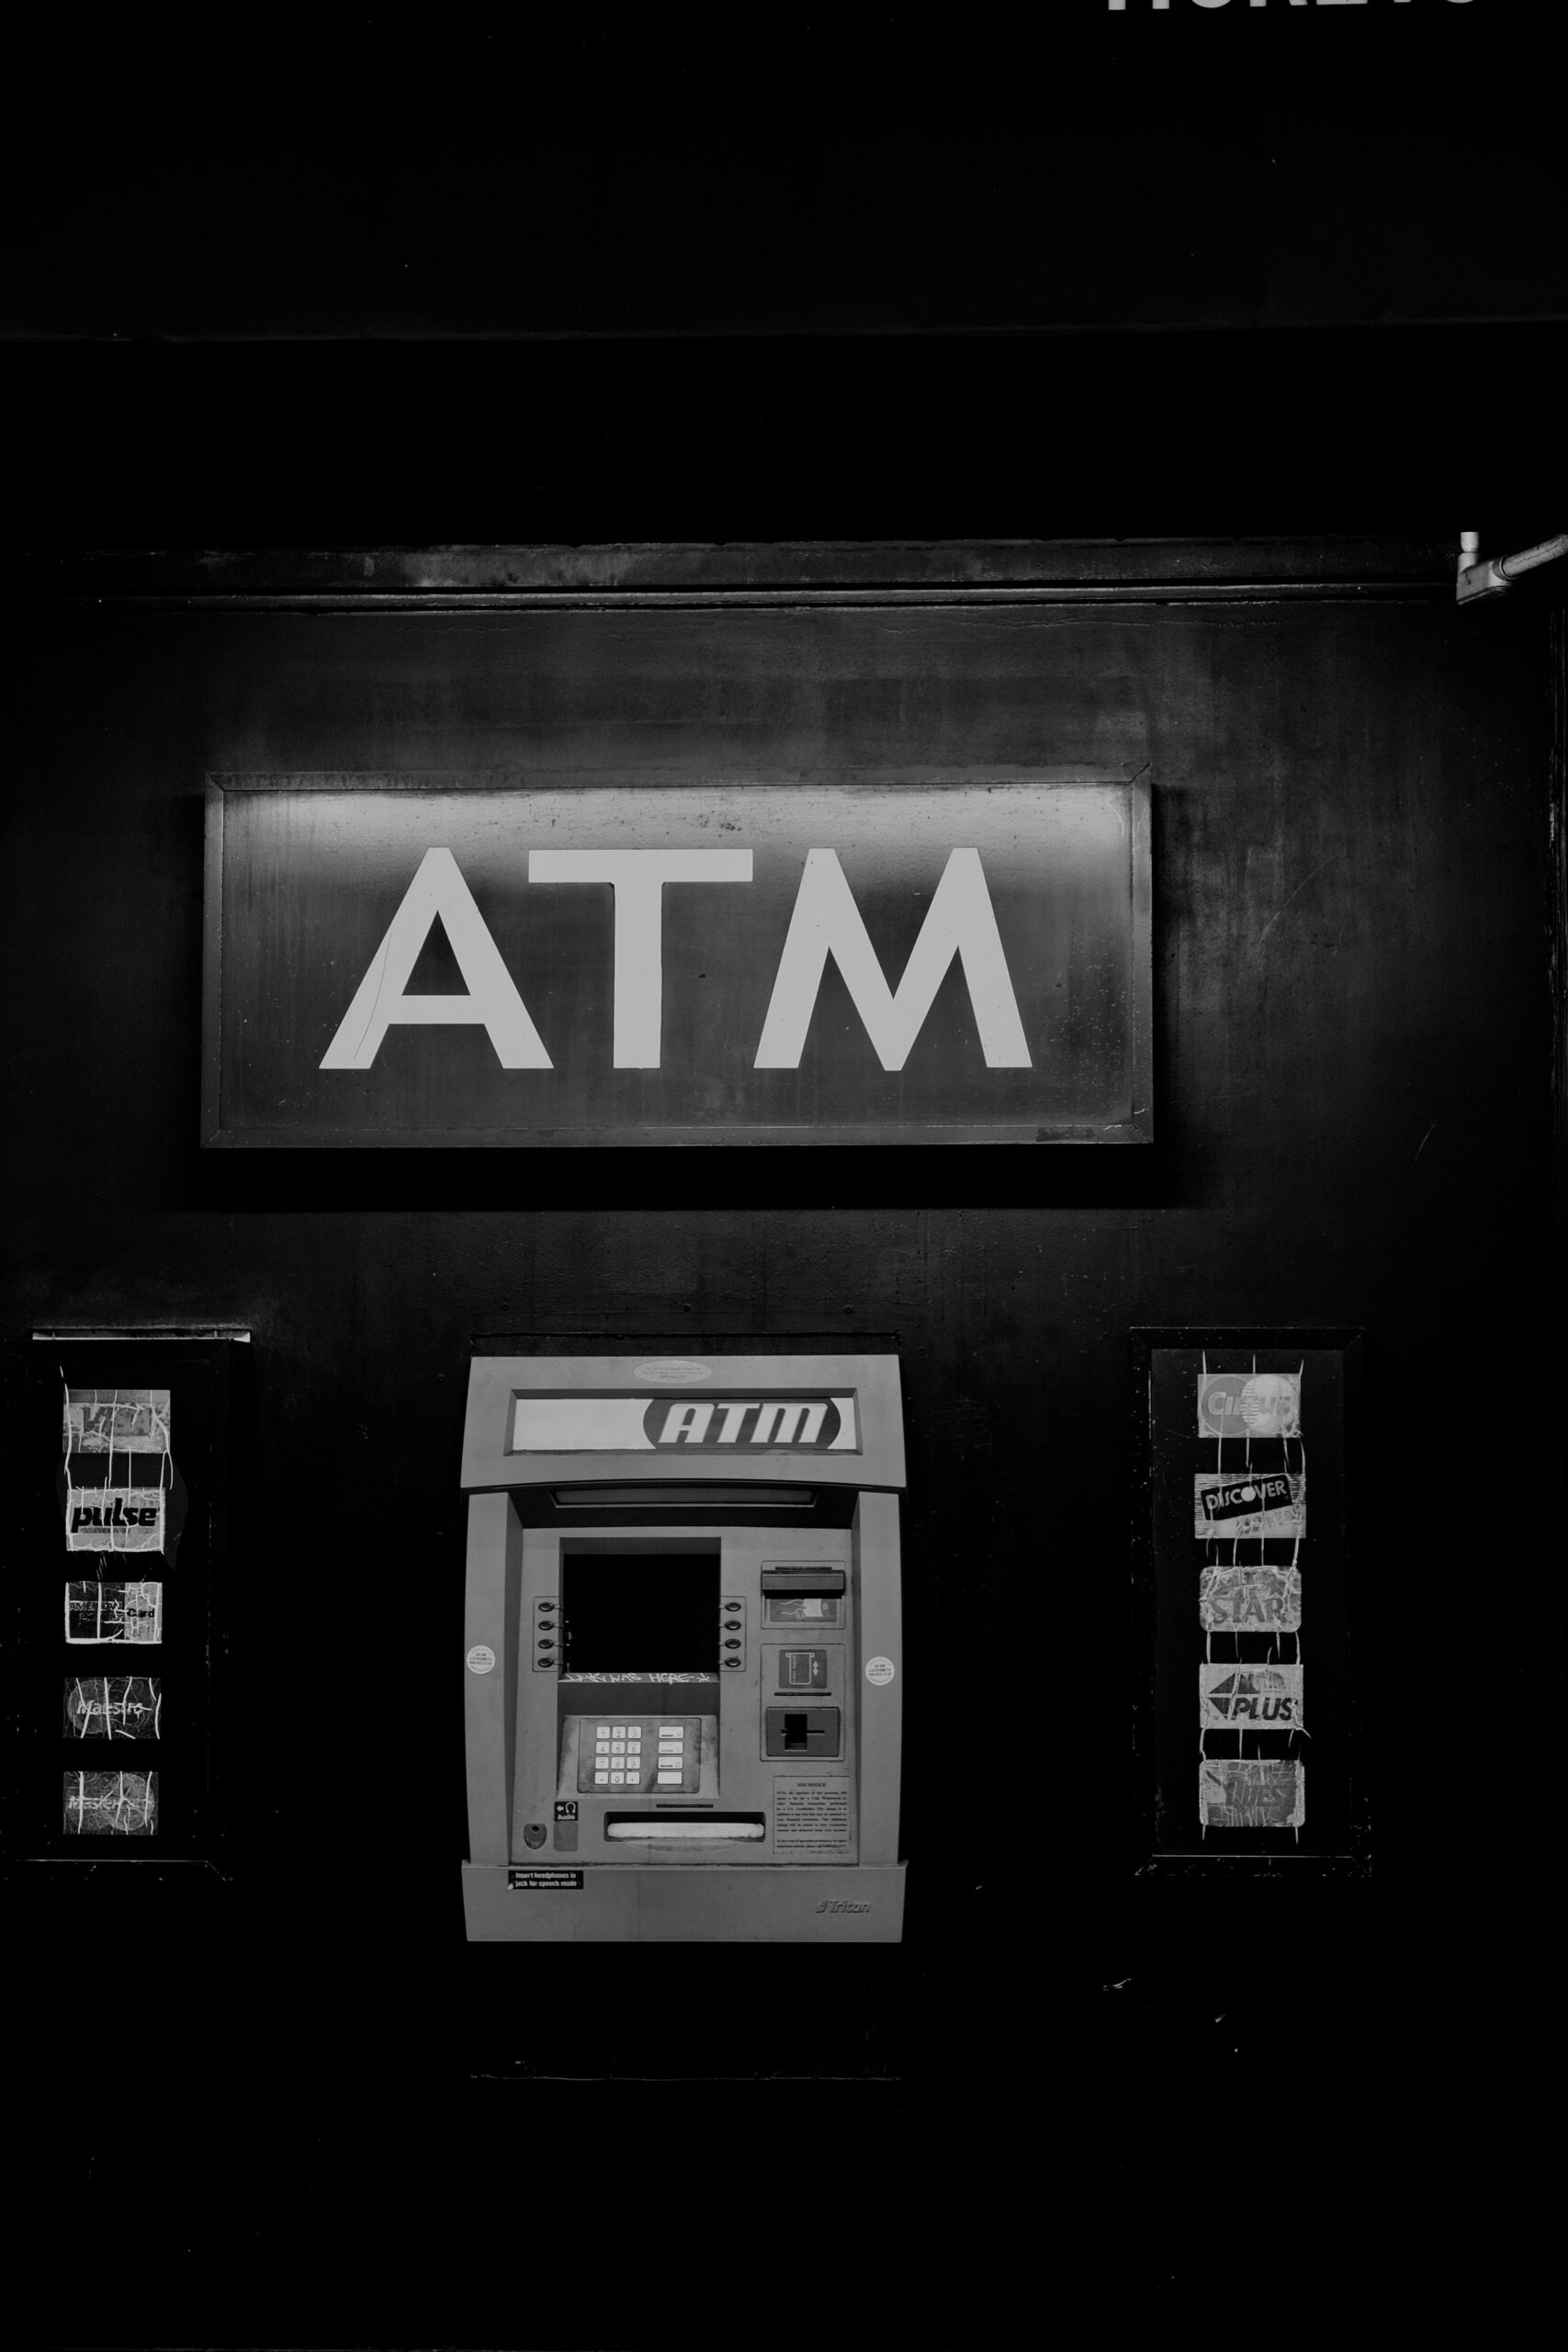 ATM in black and white